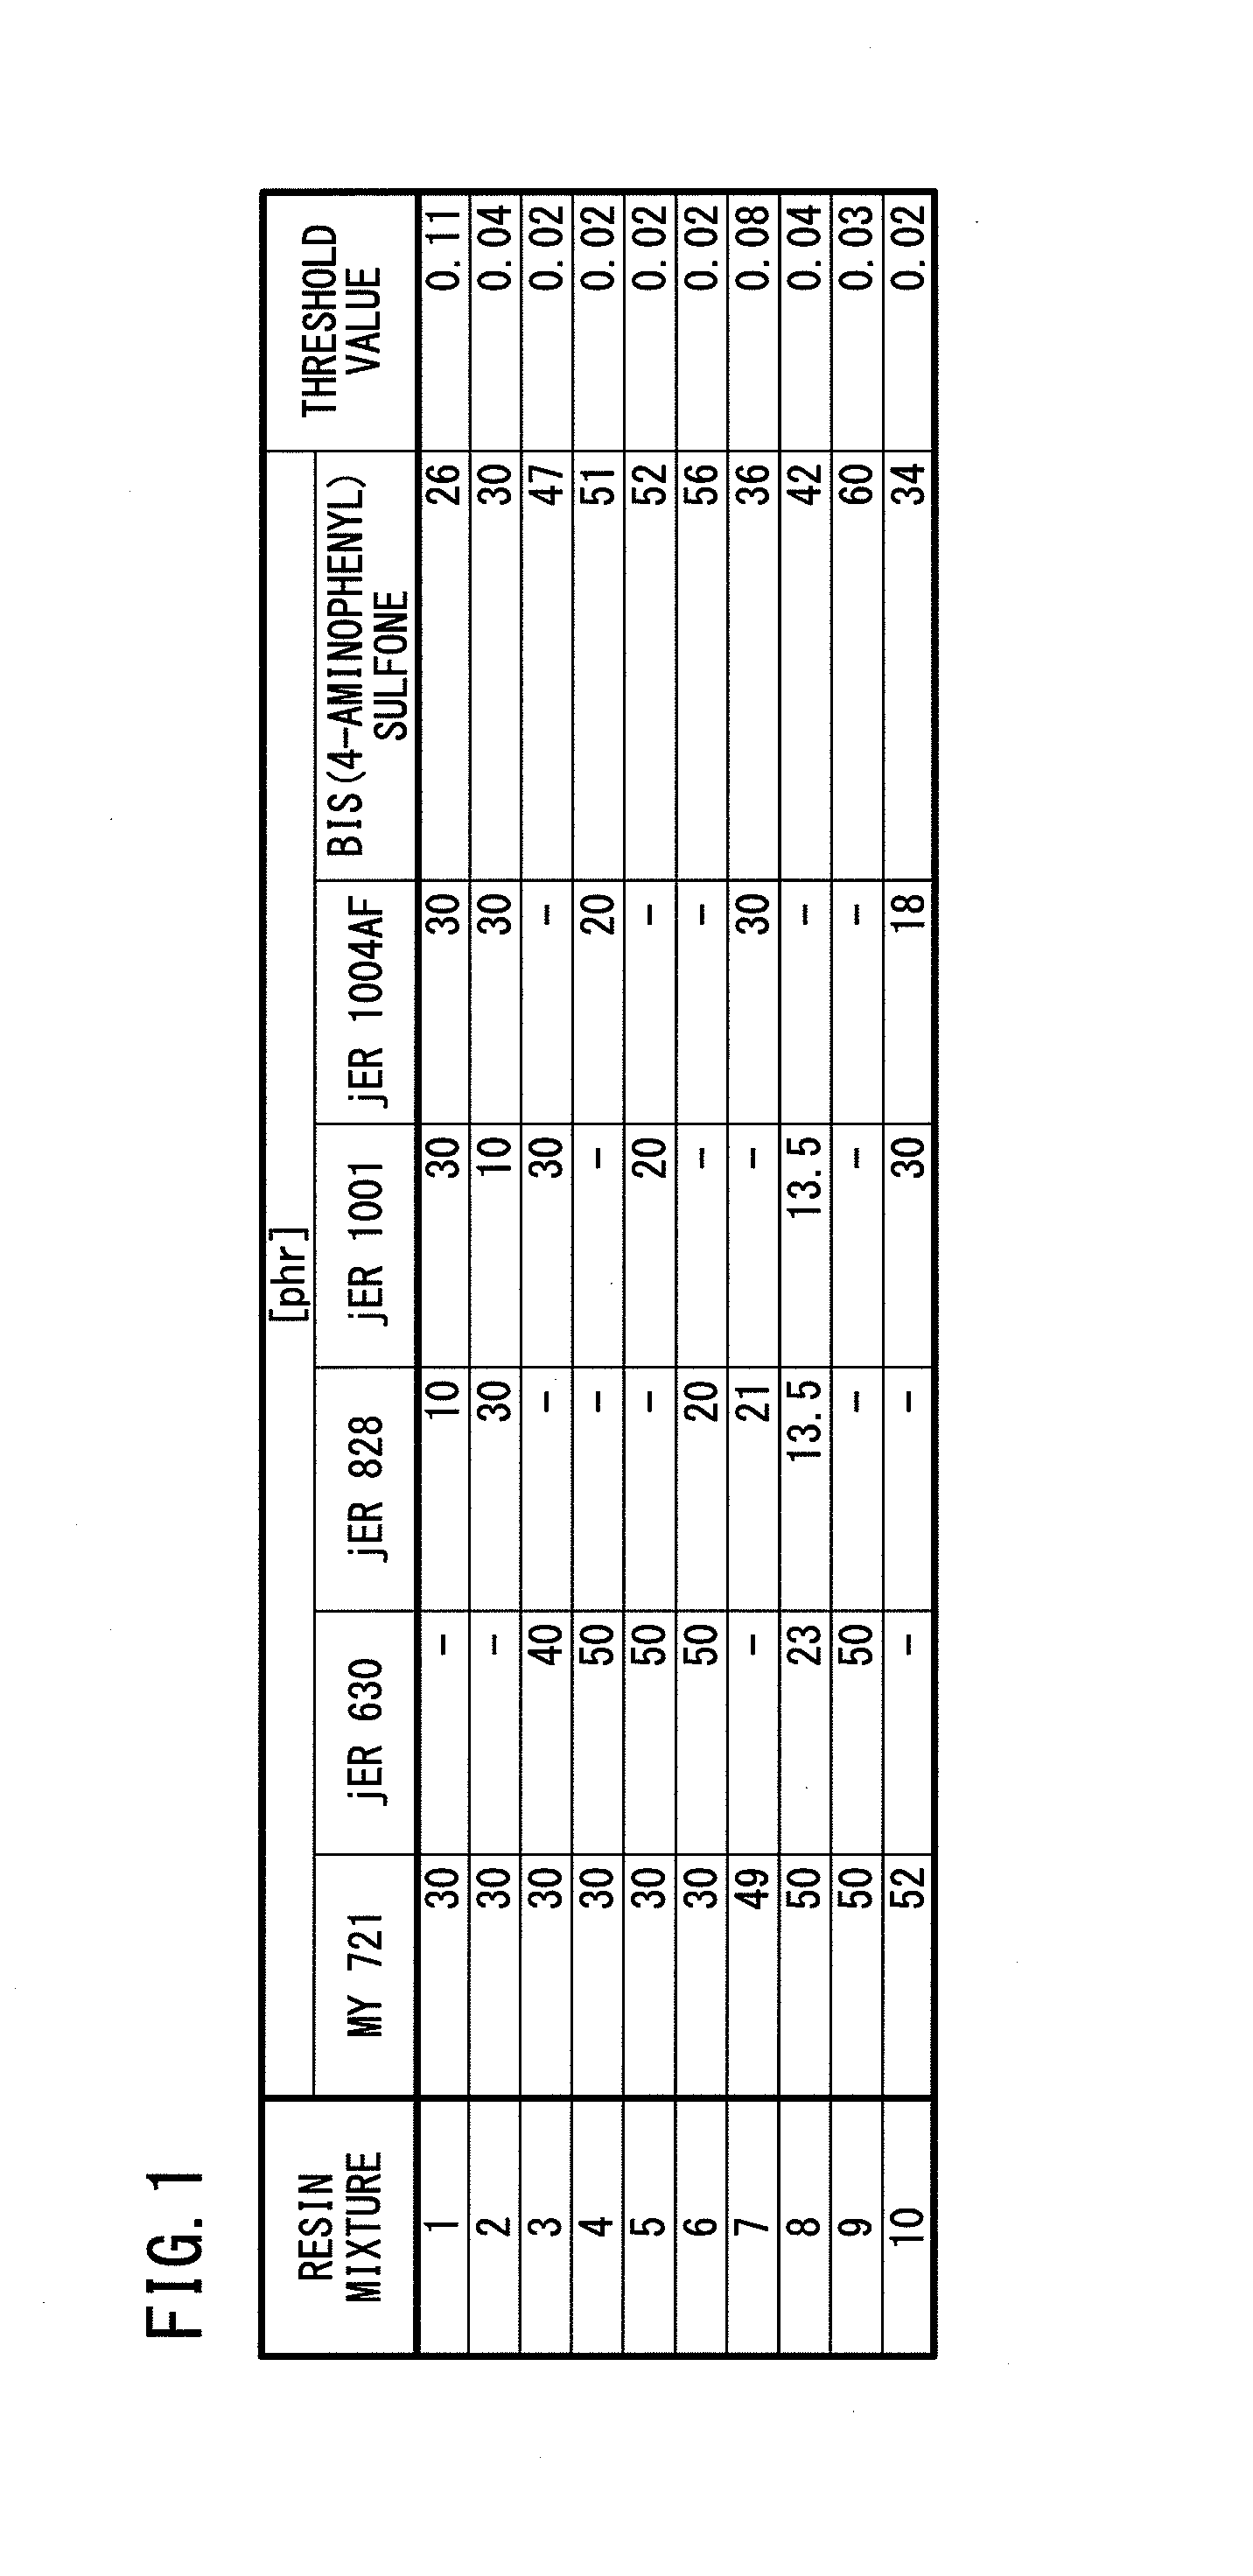 Method of evaluating dispersion degrees of mixed epoxy resins